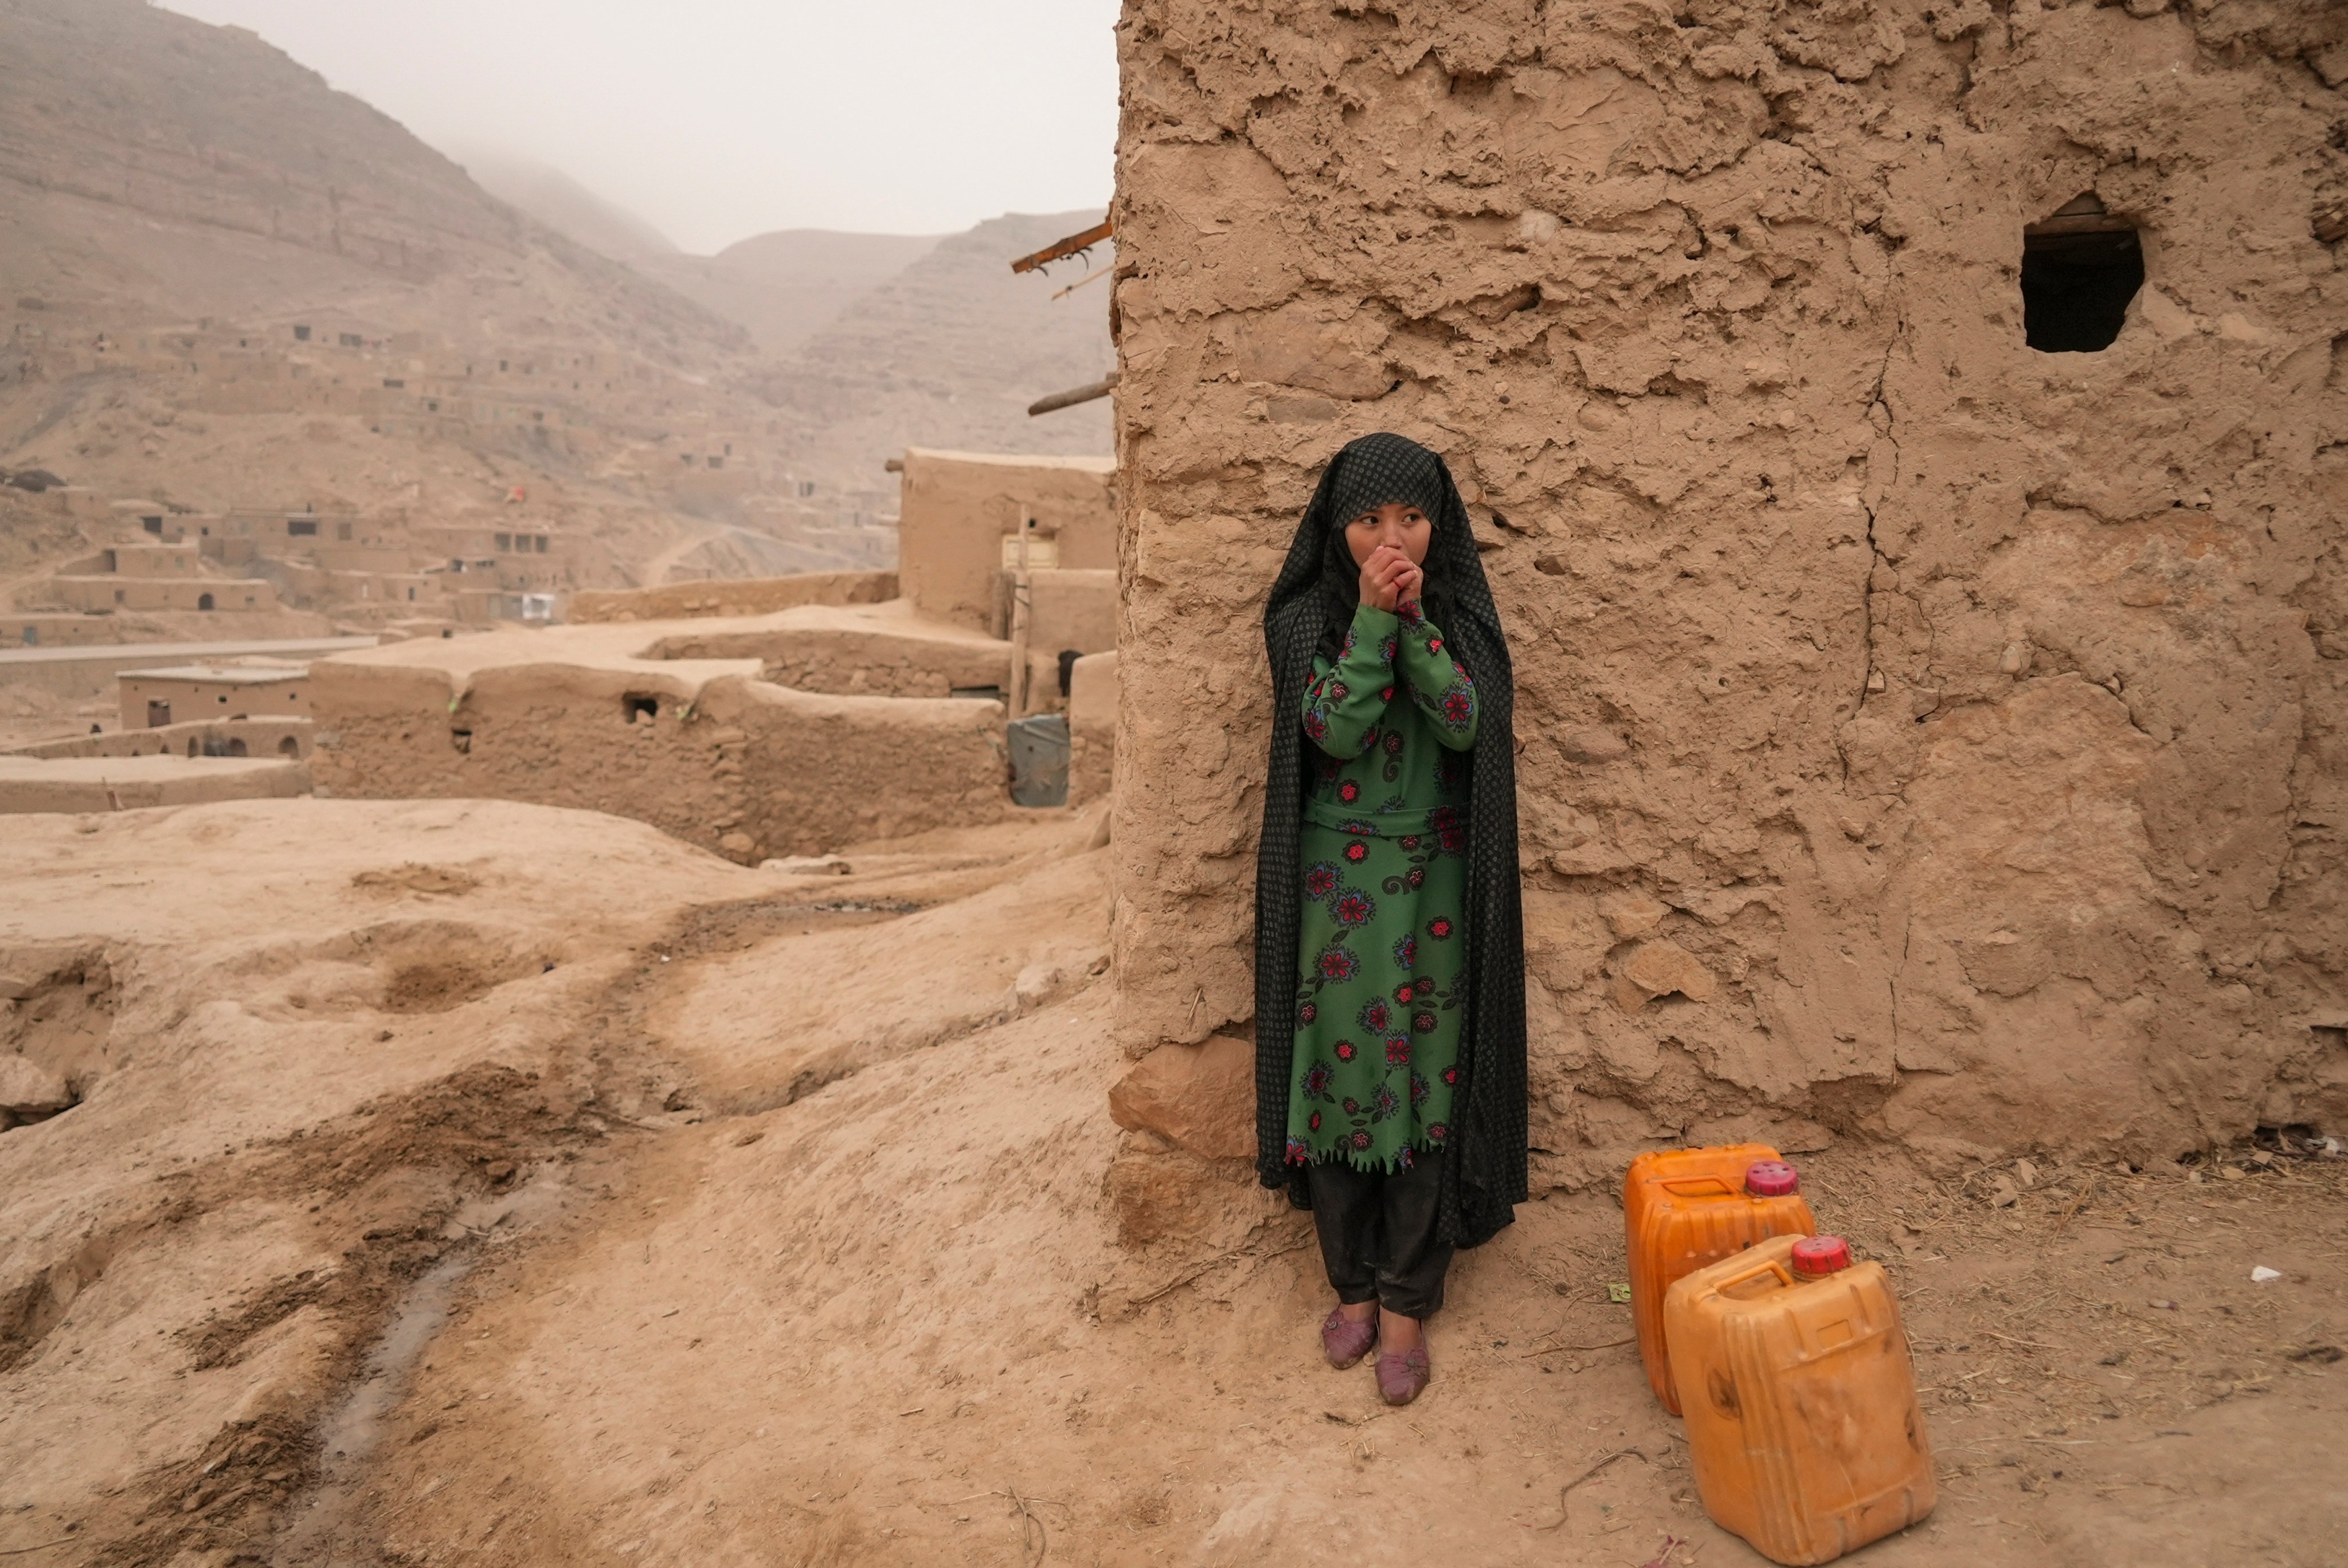 An Afghan girl warms up her hands as she rests from carrying the water in Balucha, Afghanistan, on December 14, 2021. The effects of climate change on women and girls are an increasingly pressing concern, as shown by a recent case before the European Court of Human Rights. Photo: AP